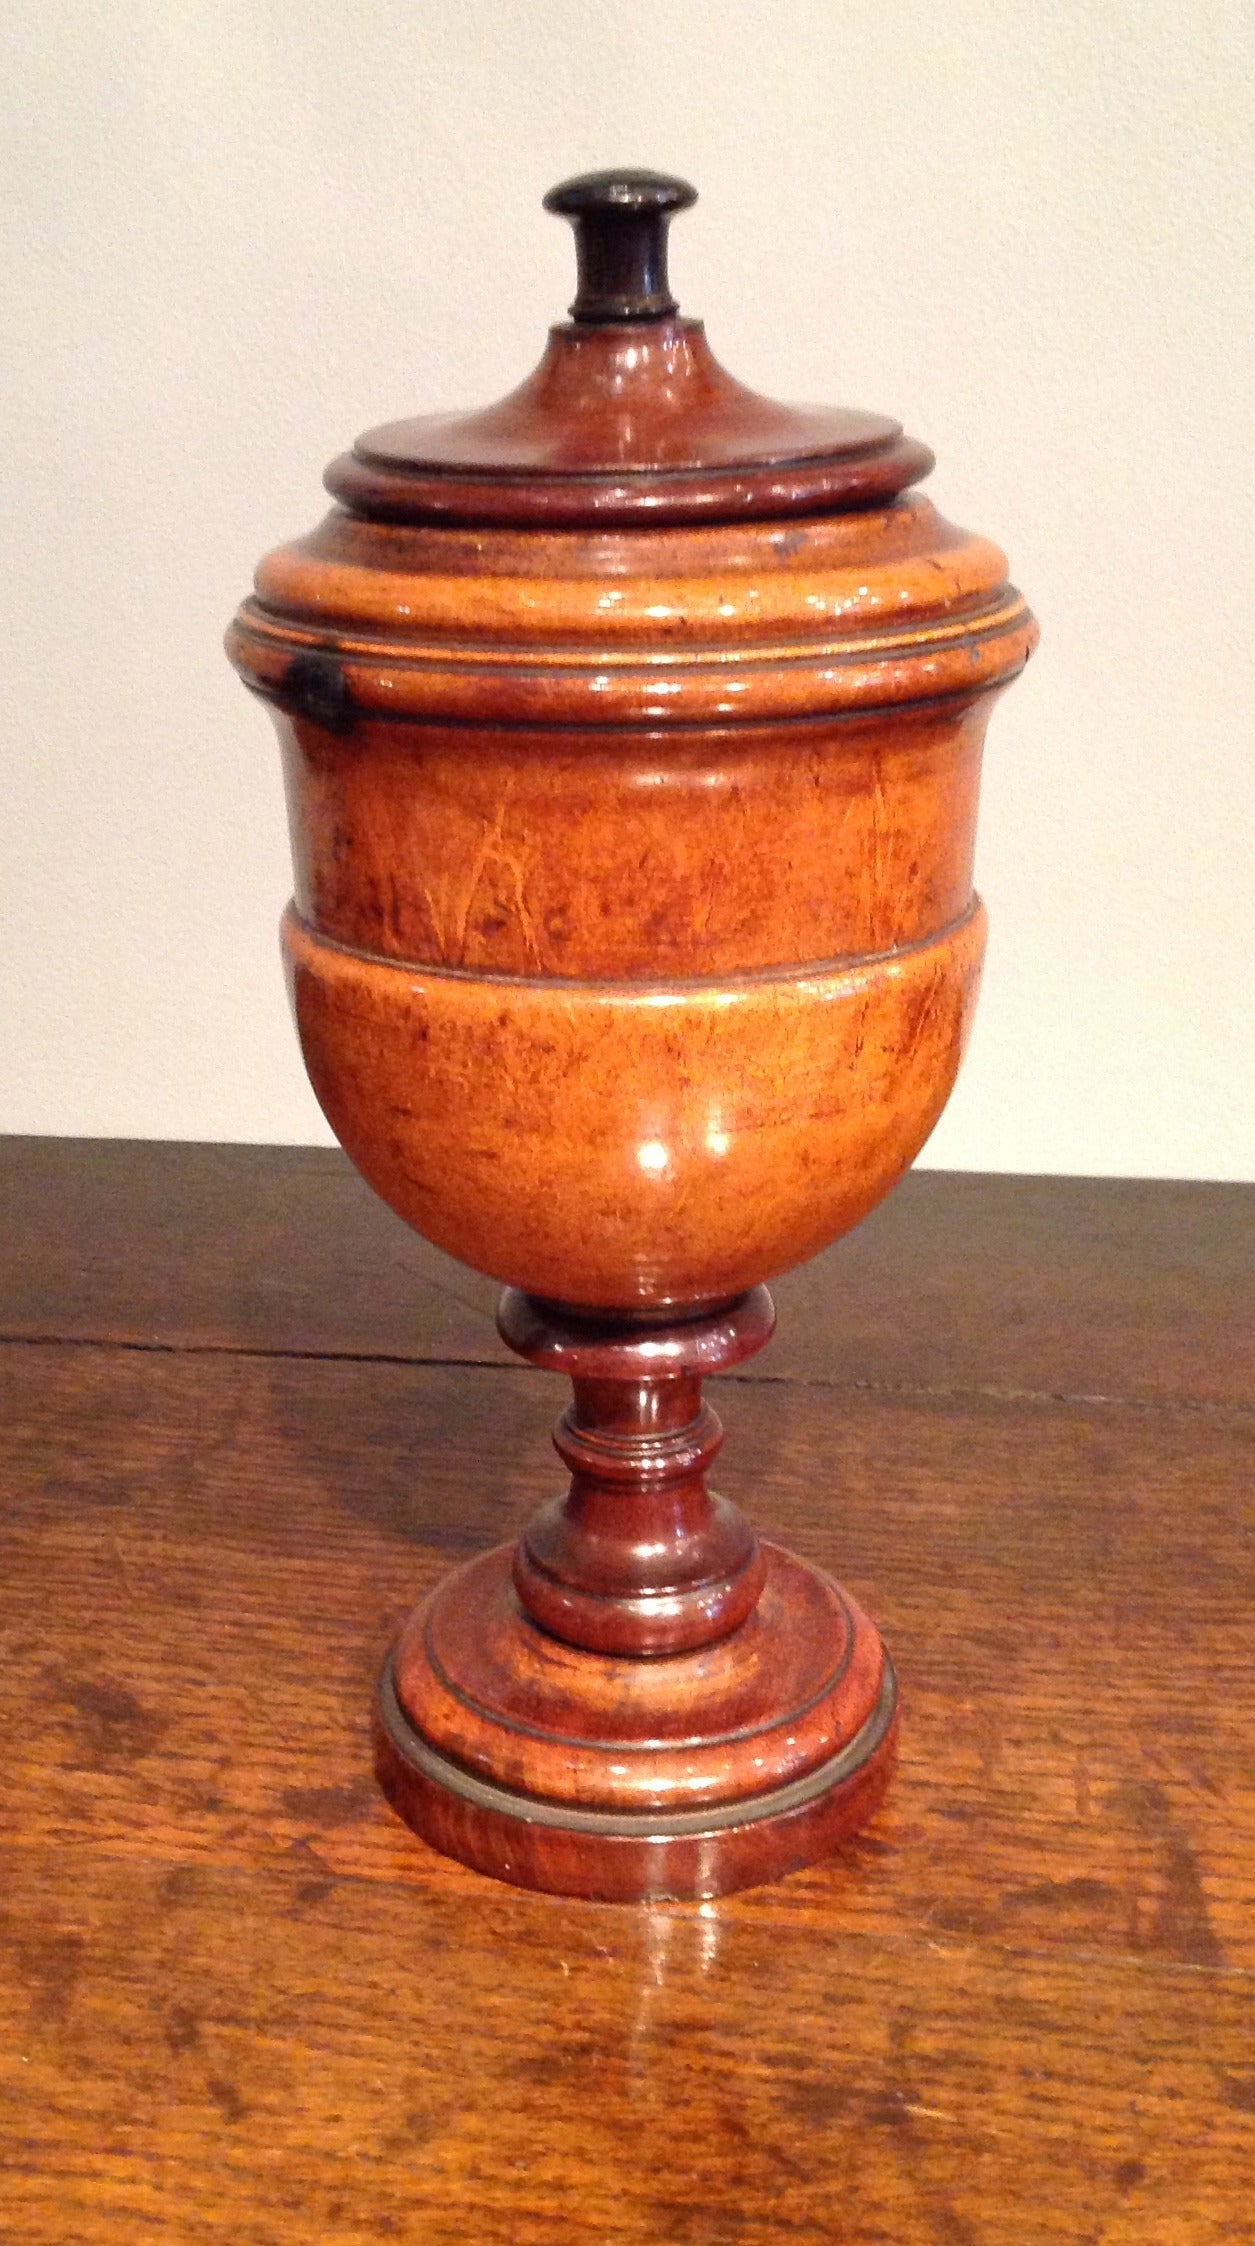 Finely turned English lignum vitae cup and cover the ring turned lid with turned handle, the cup with deeply and crisply turned rings on stepped base. Impressive scale and superb color. A wonderful piece of treen, circa 1880.